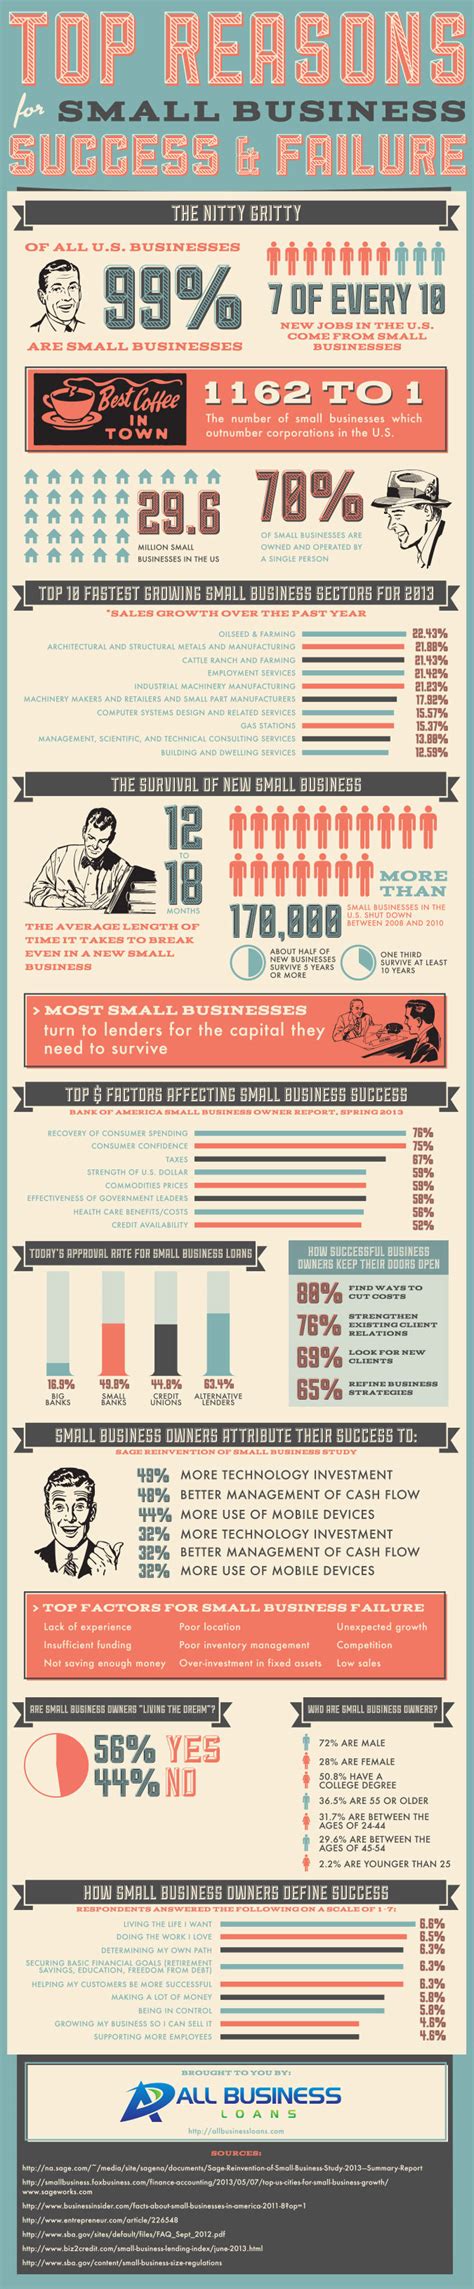 Top Reasons For Small Business Success And Failure Infographic